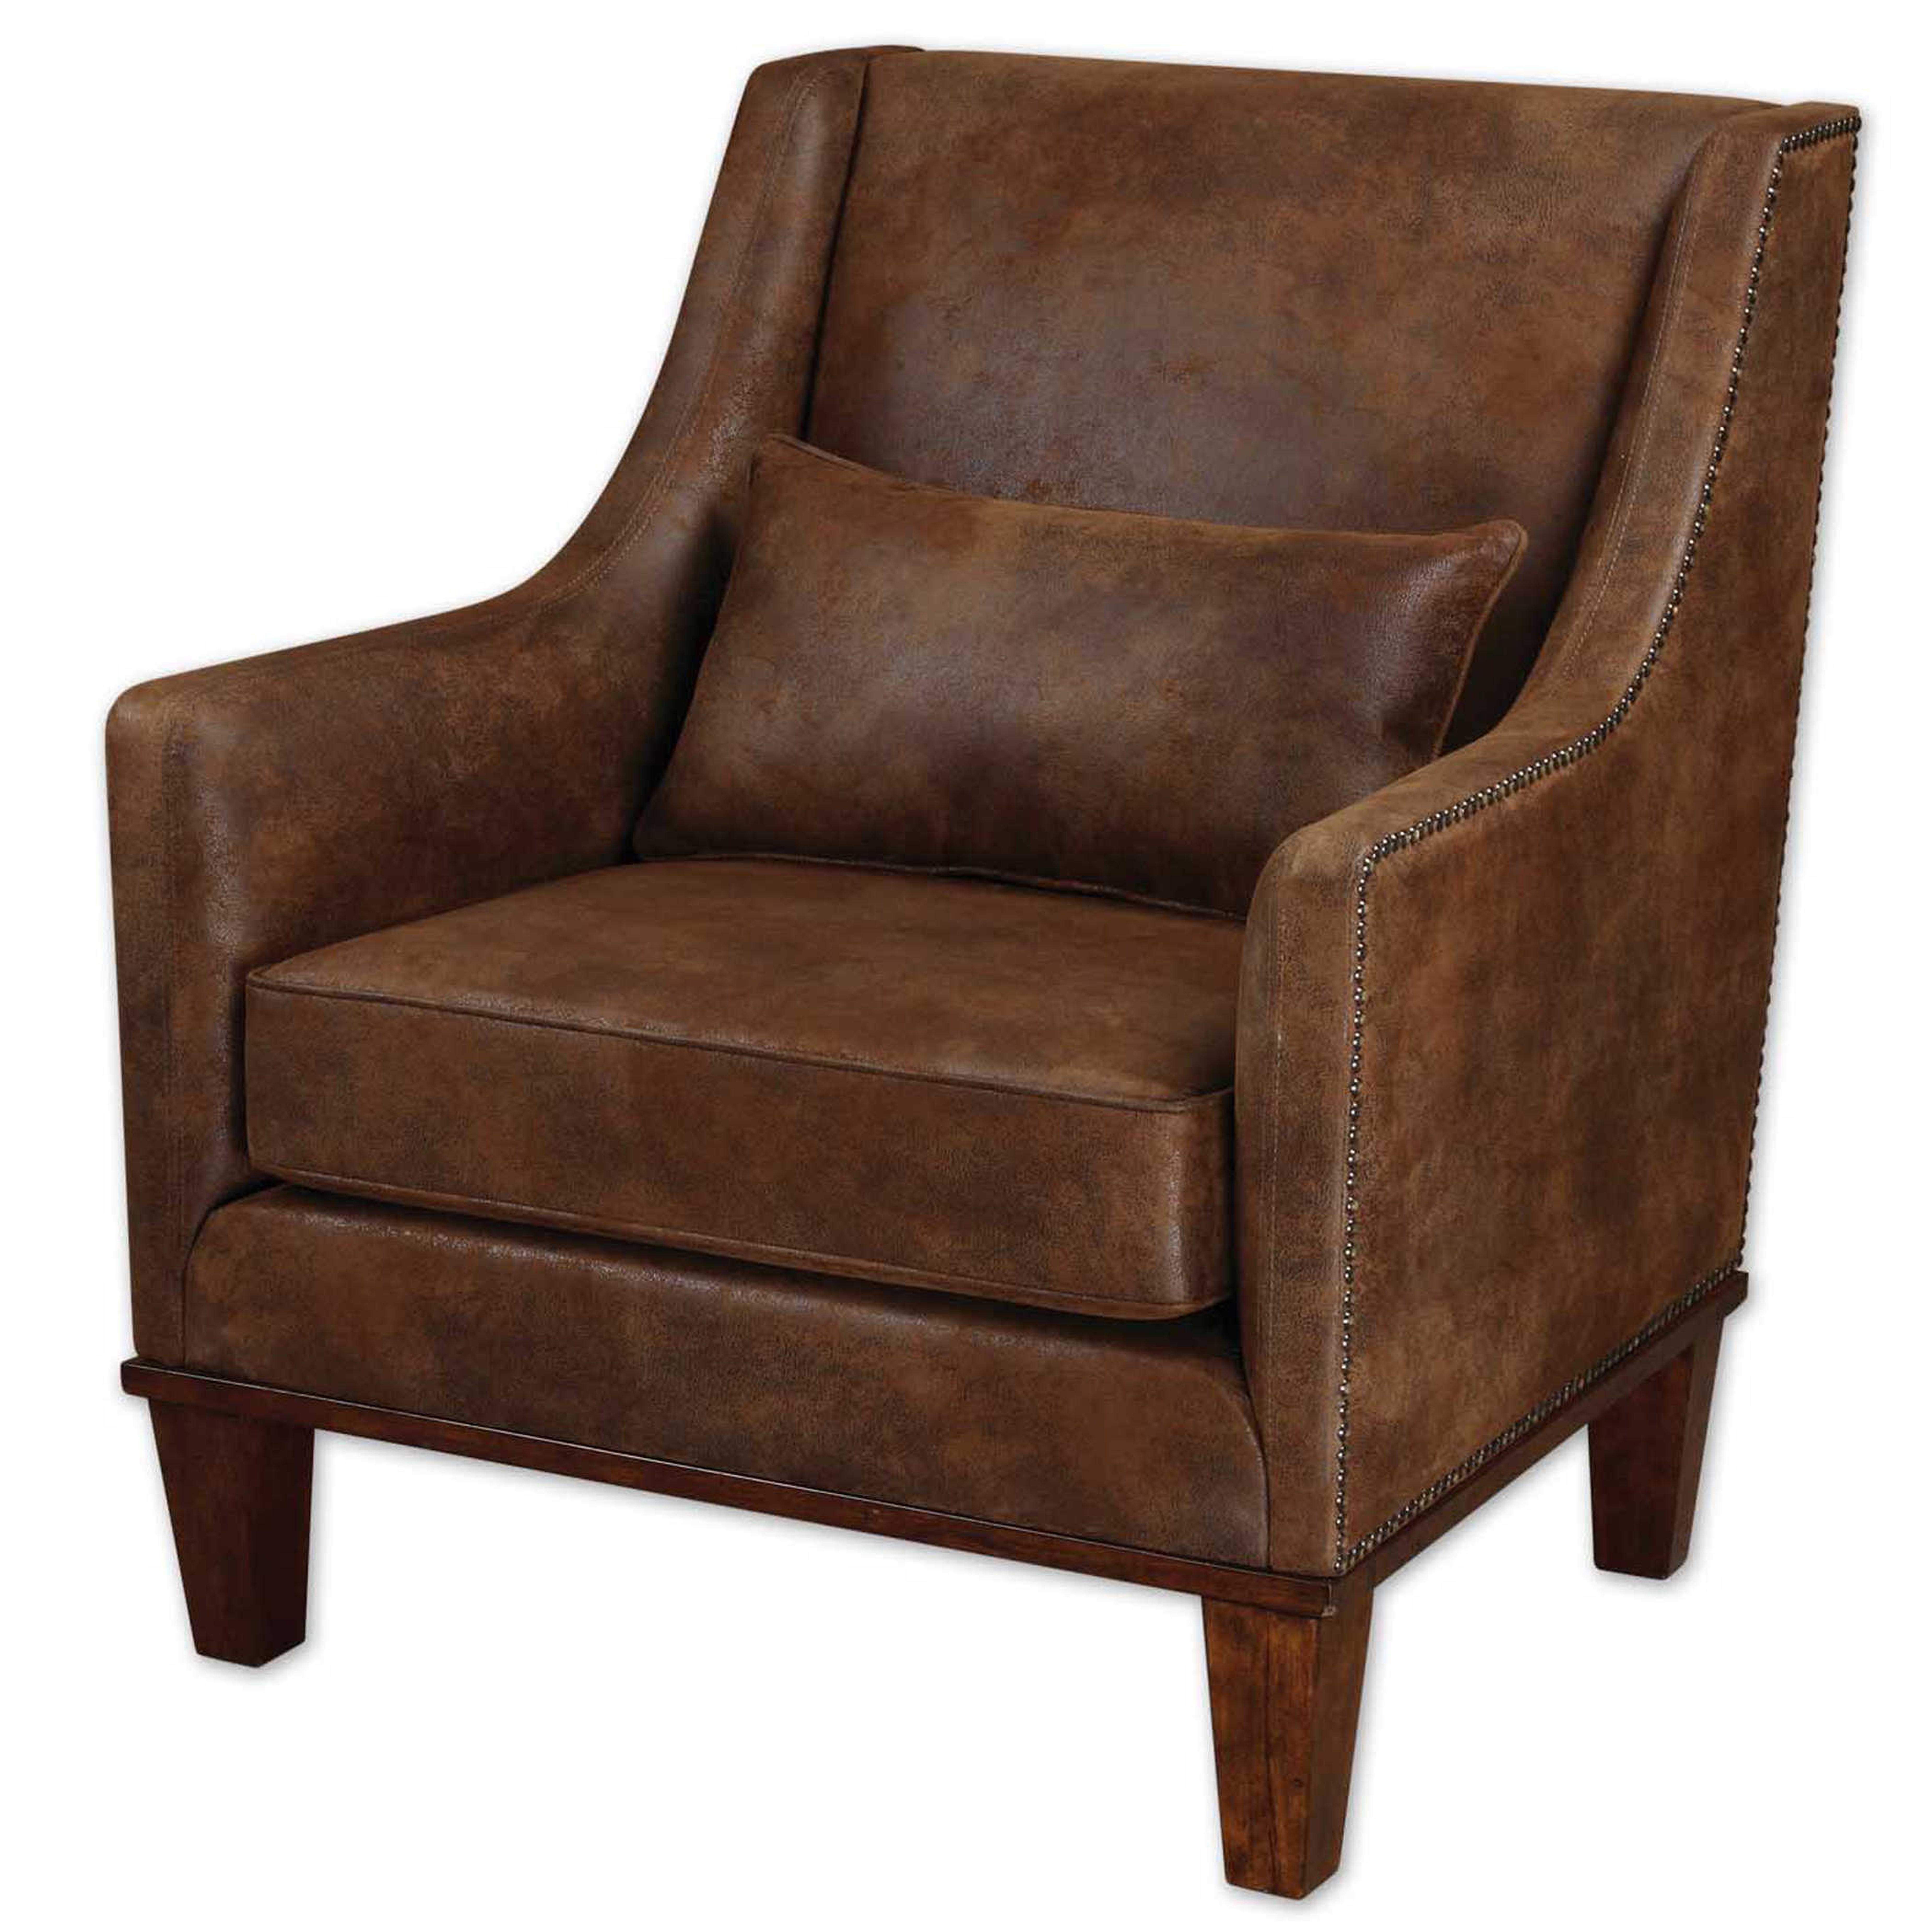 Clay Leather Armchair - Hudsonhill Foundry